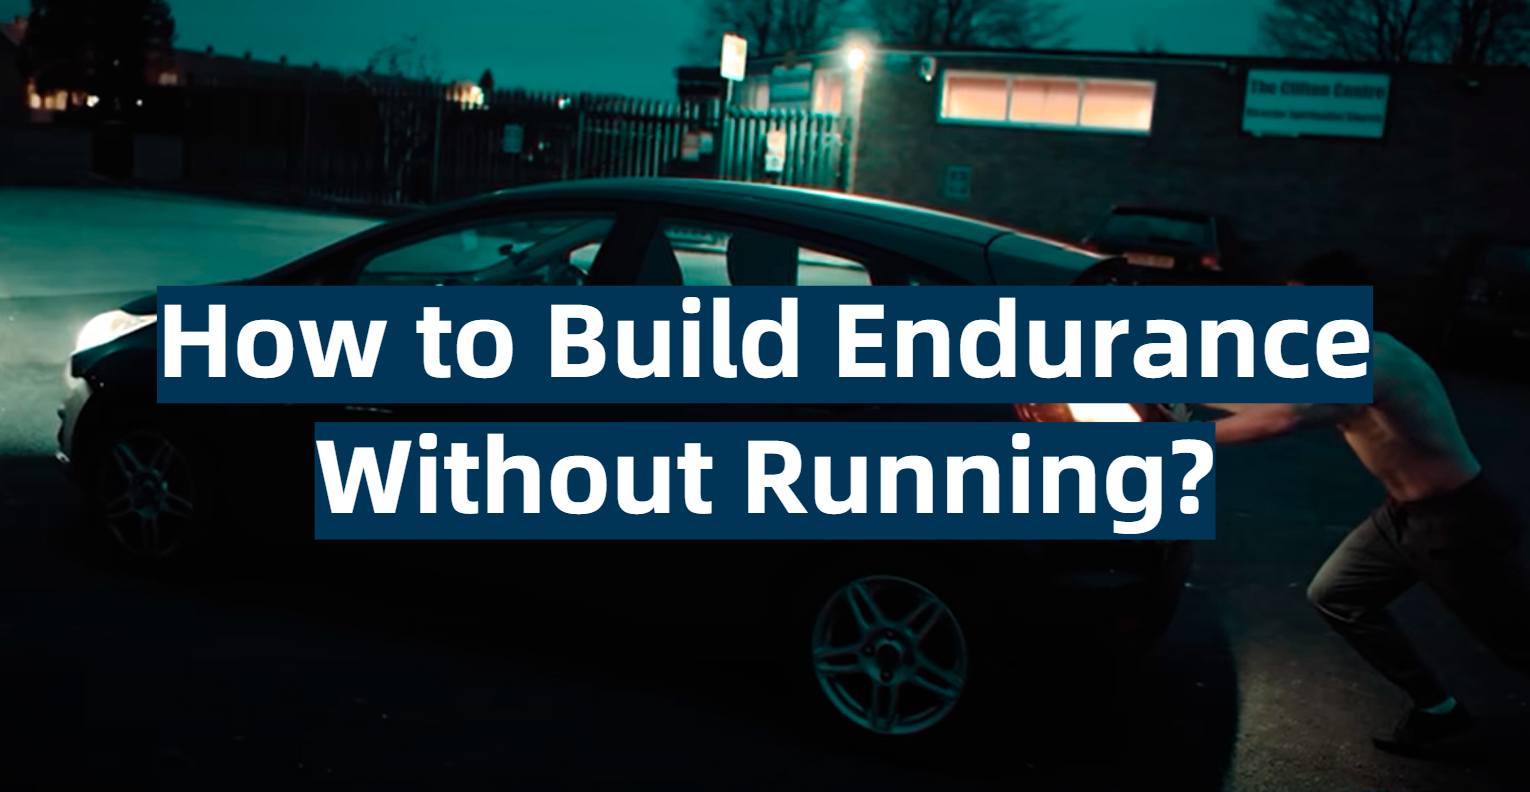 How to Build Endurance Without Running?